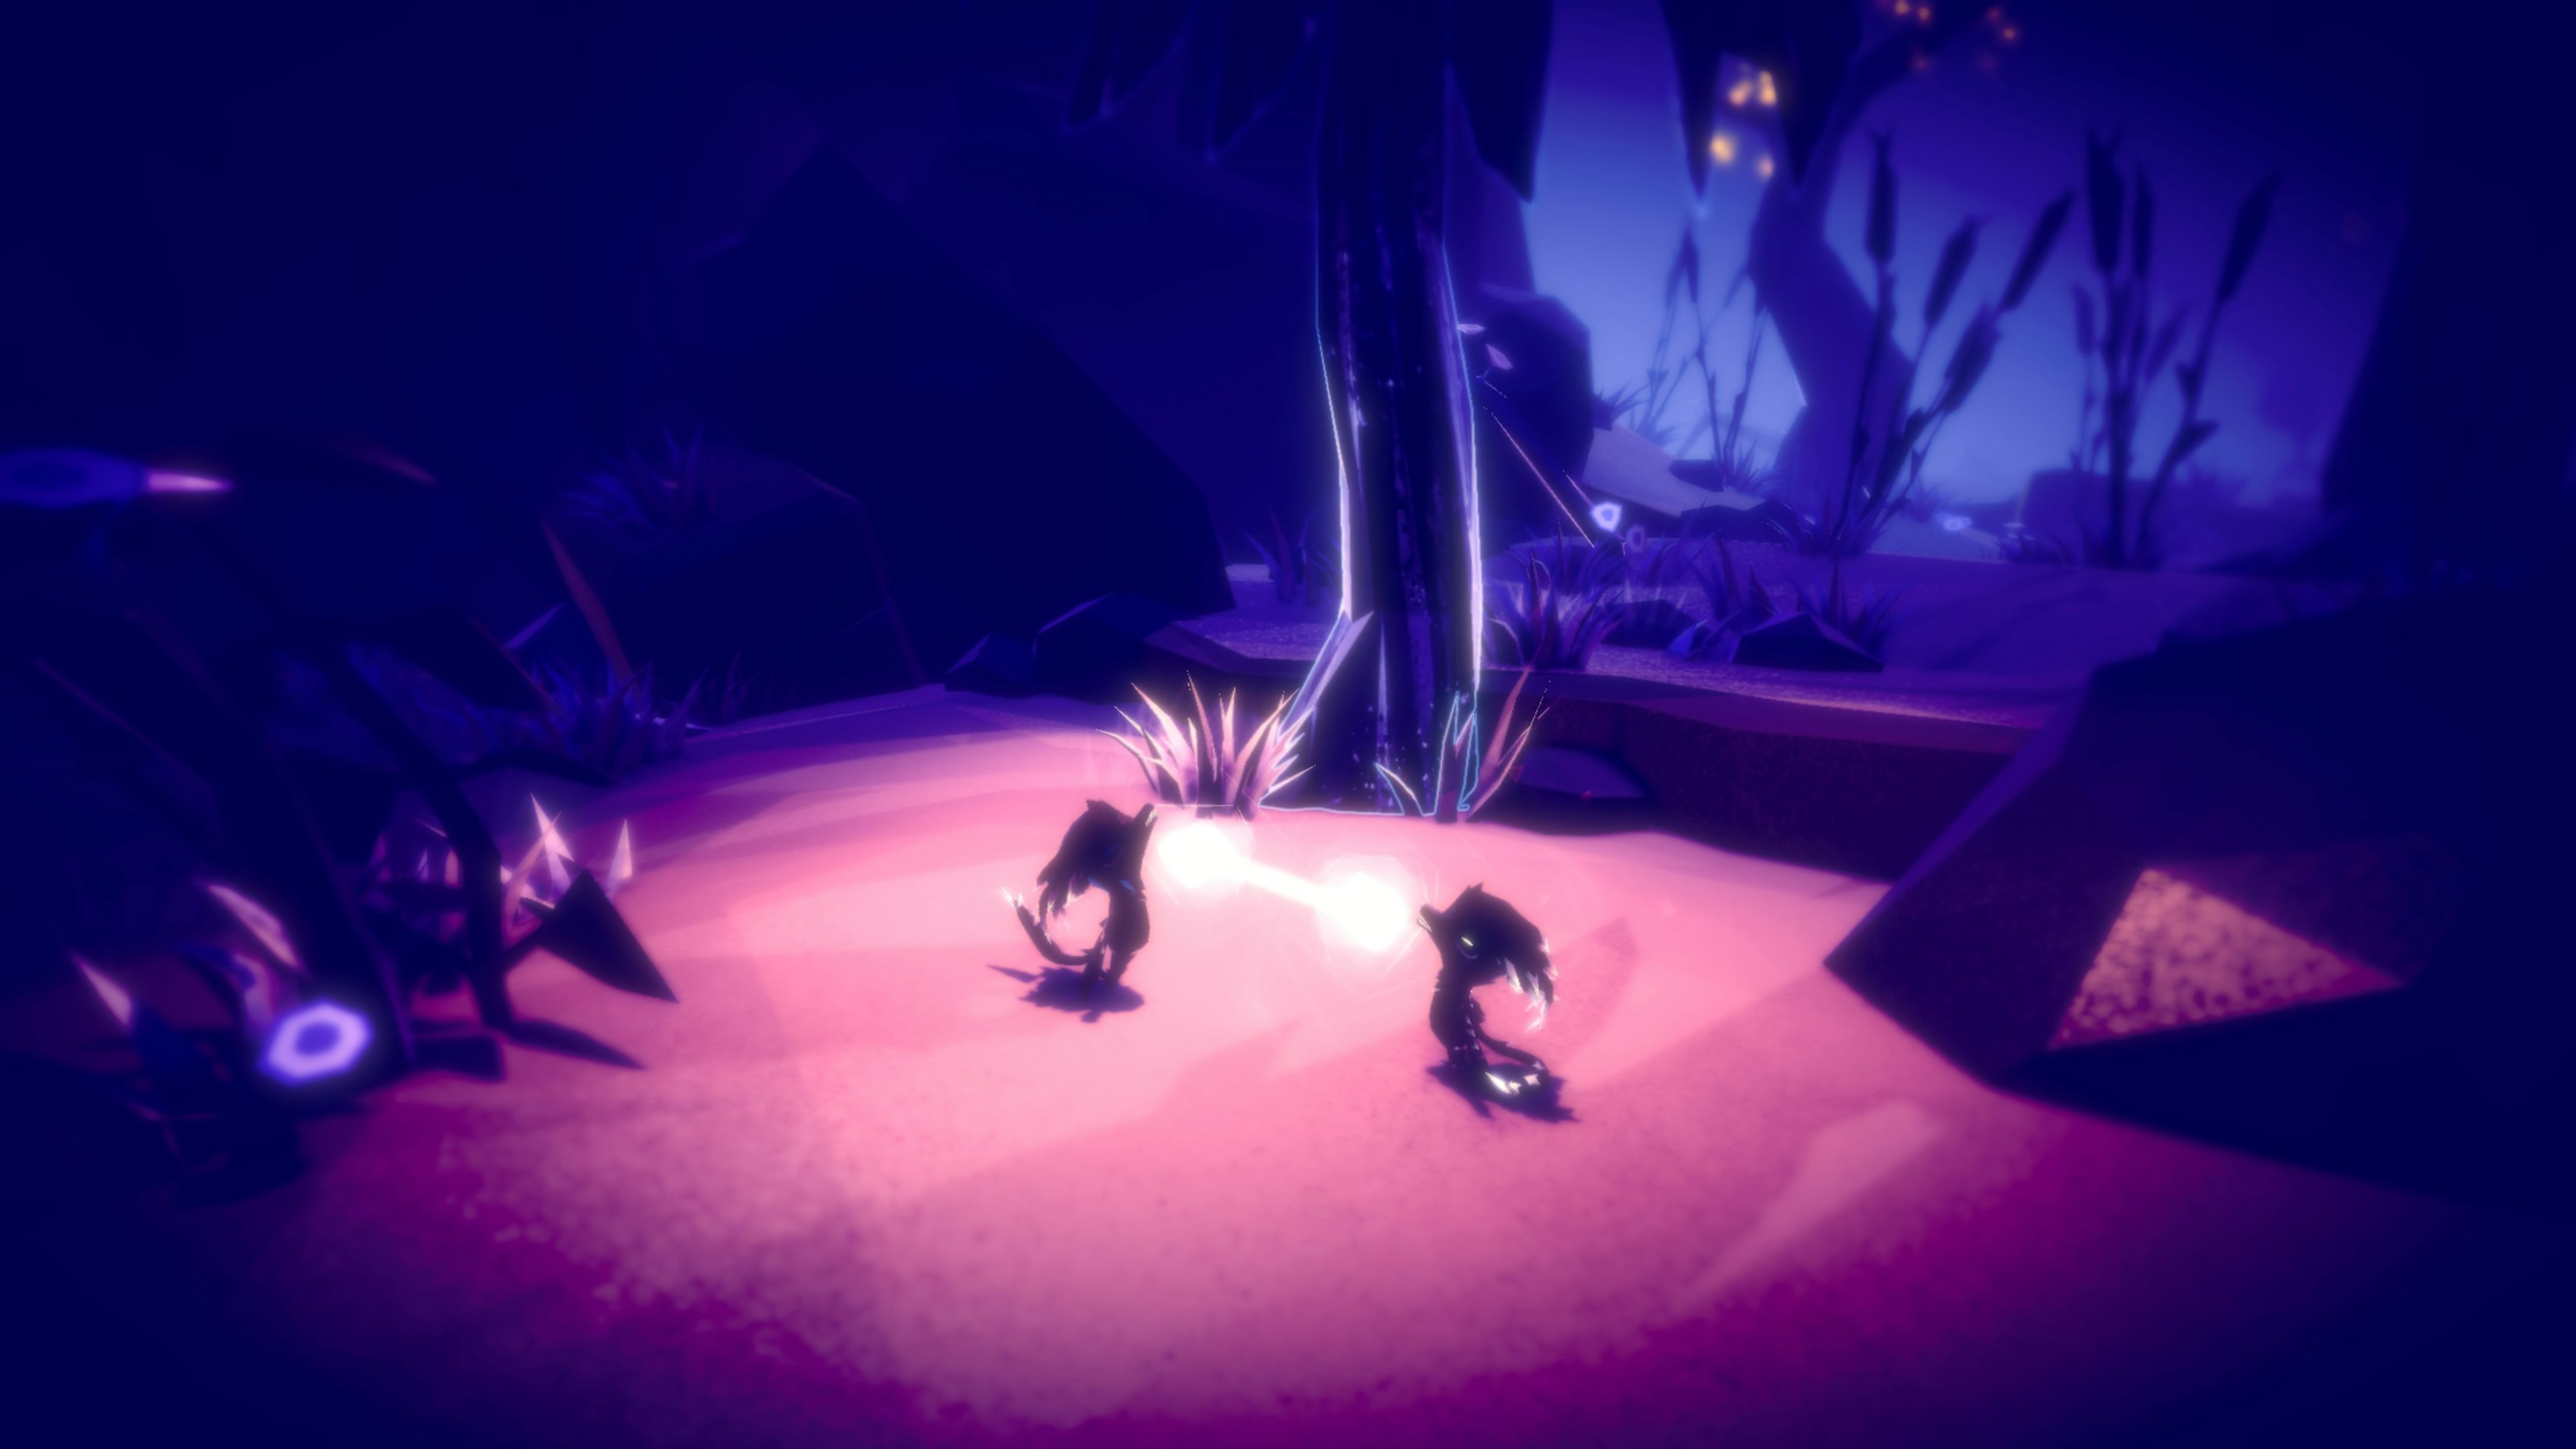 Absorbere hvidløg Idol Fe review: A breathtaking journey into a world of hope